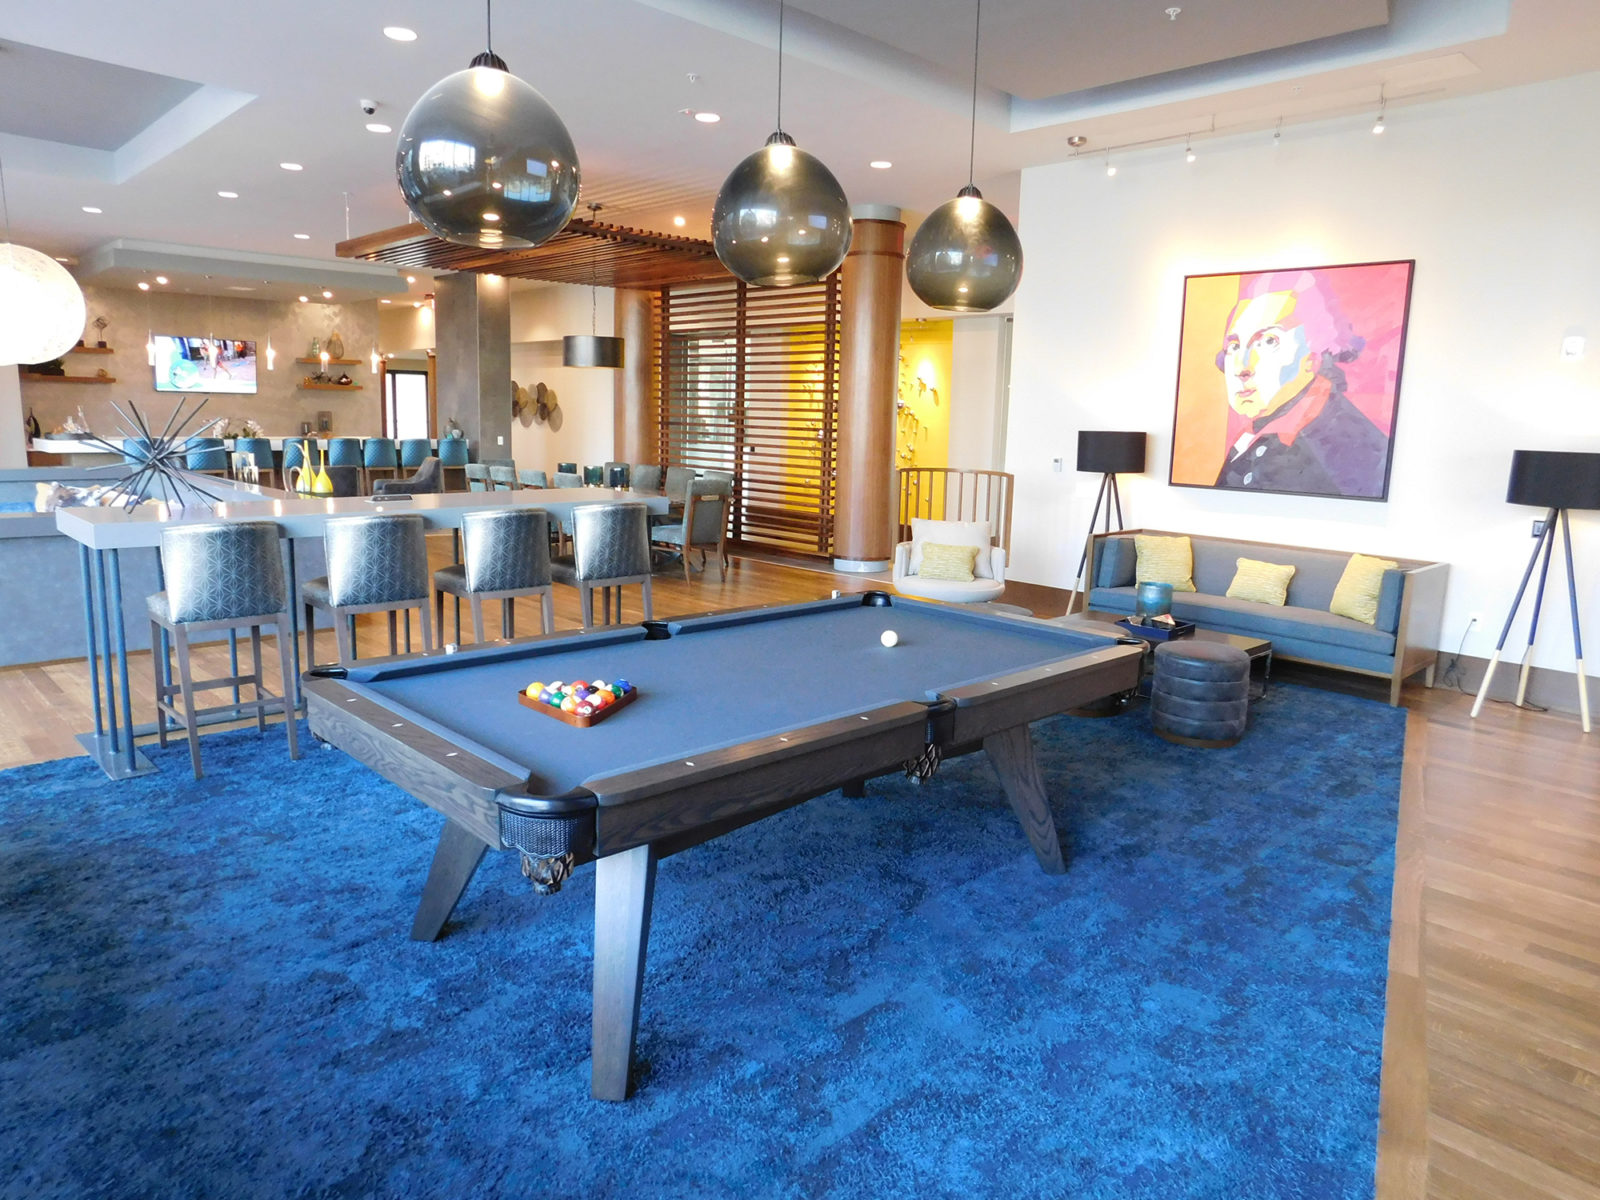 Common area with a pool table under 3 pendant lights and sitting on a blue carpet. There is a set of 4 stools behind at a seating area.